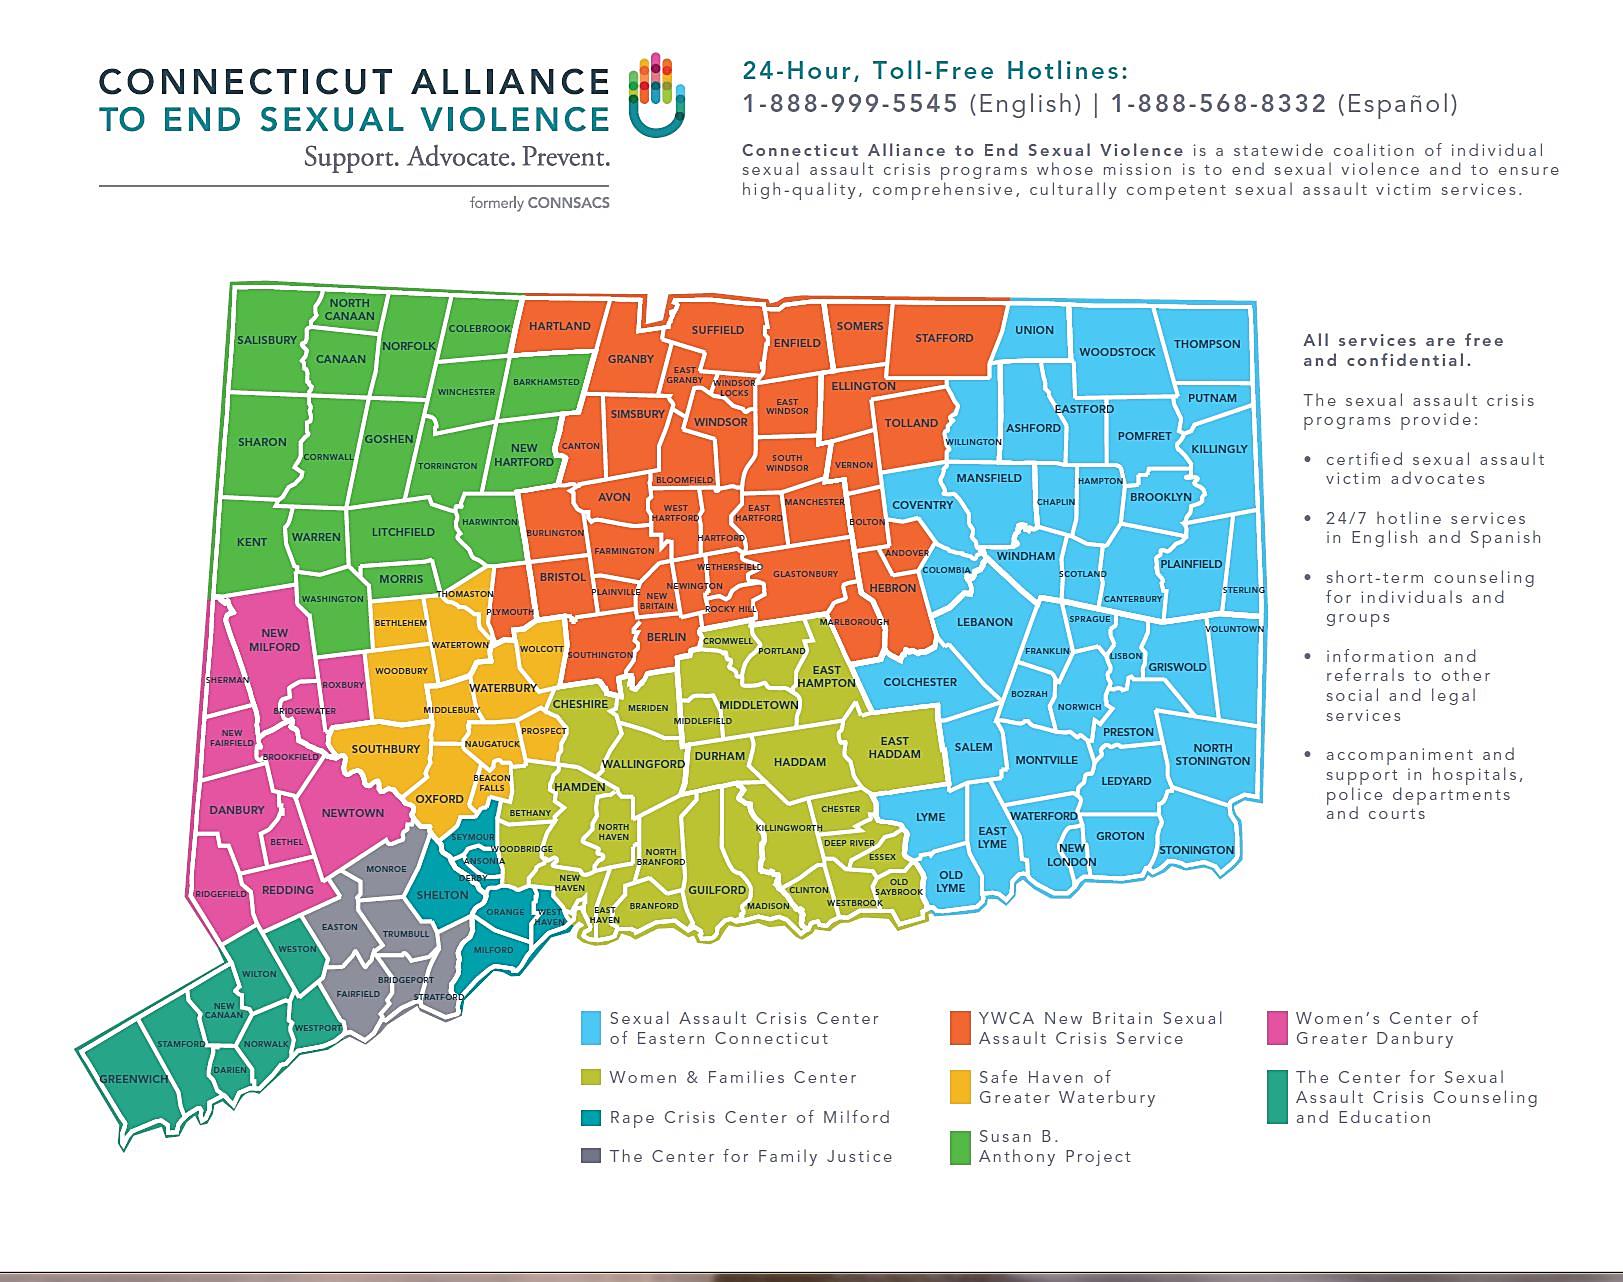 Connecticut Alliance to End Sexual Violence  - General Information